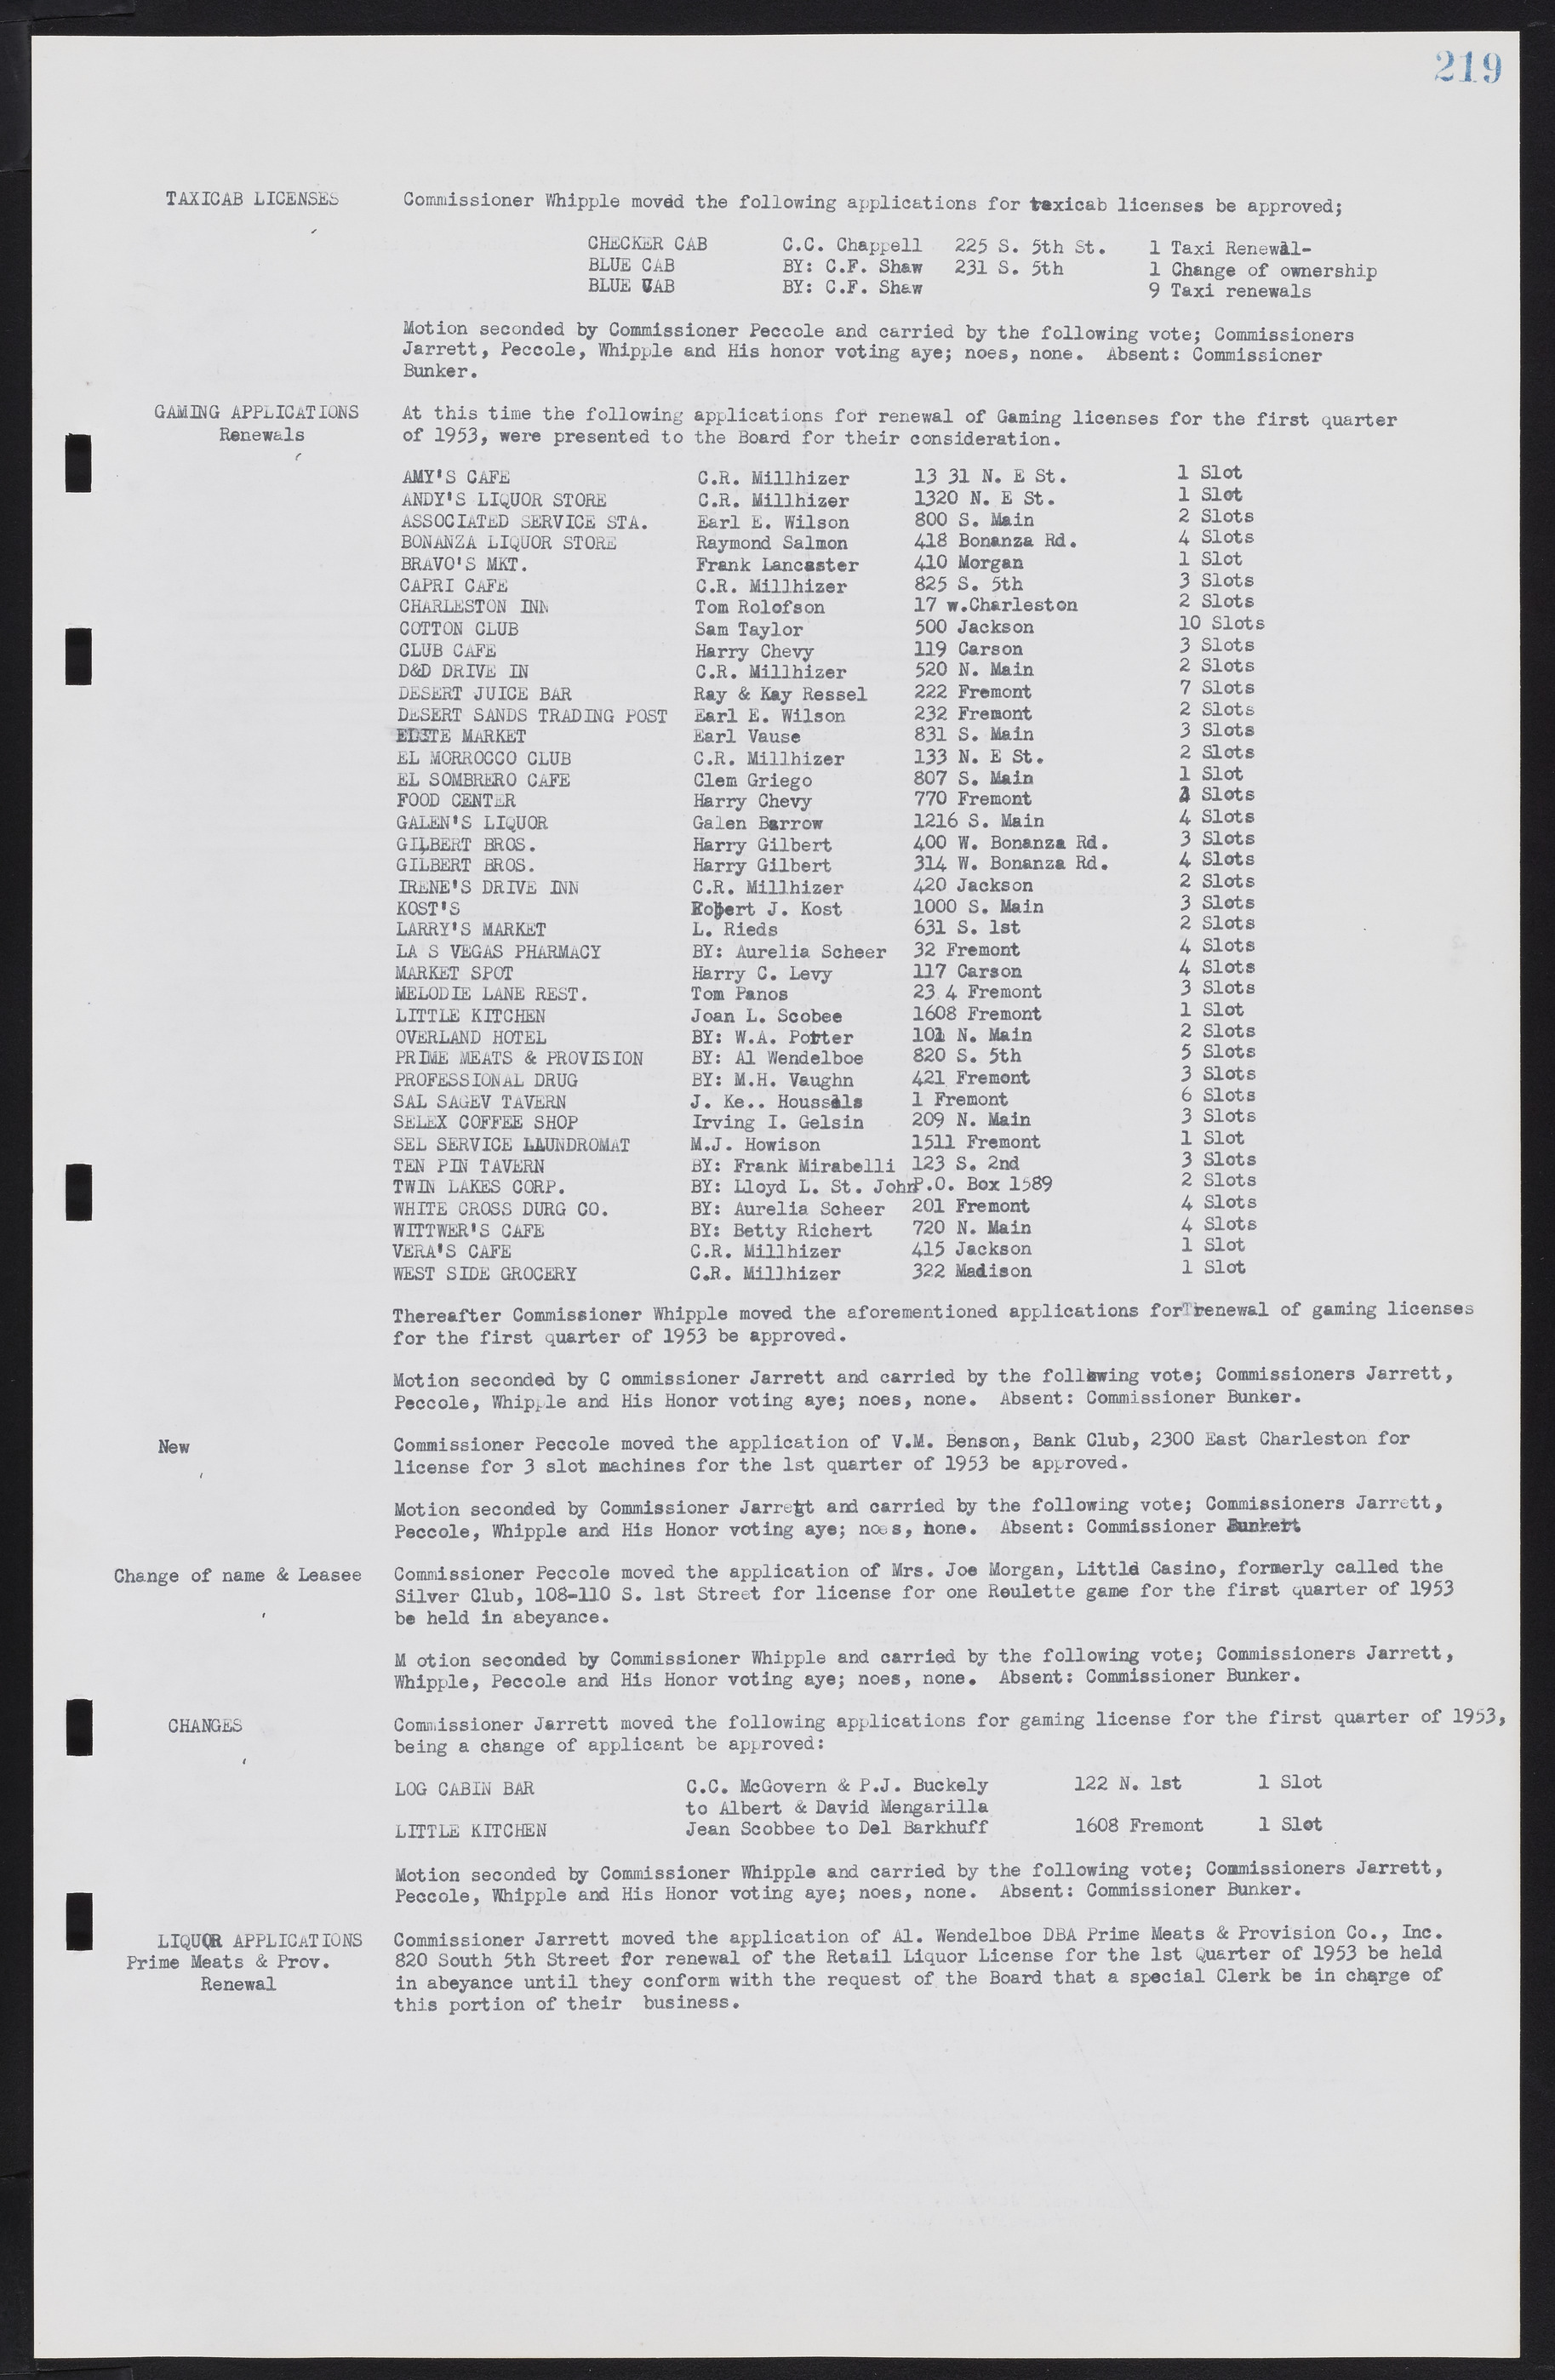 Las Vegas City Commission Minutes, May 26, 1952 to February 17, 1954, lvc000008-235